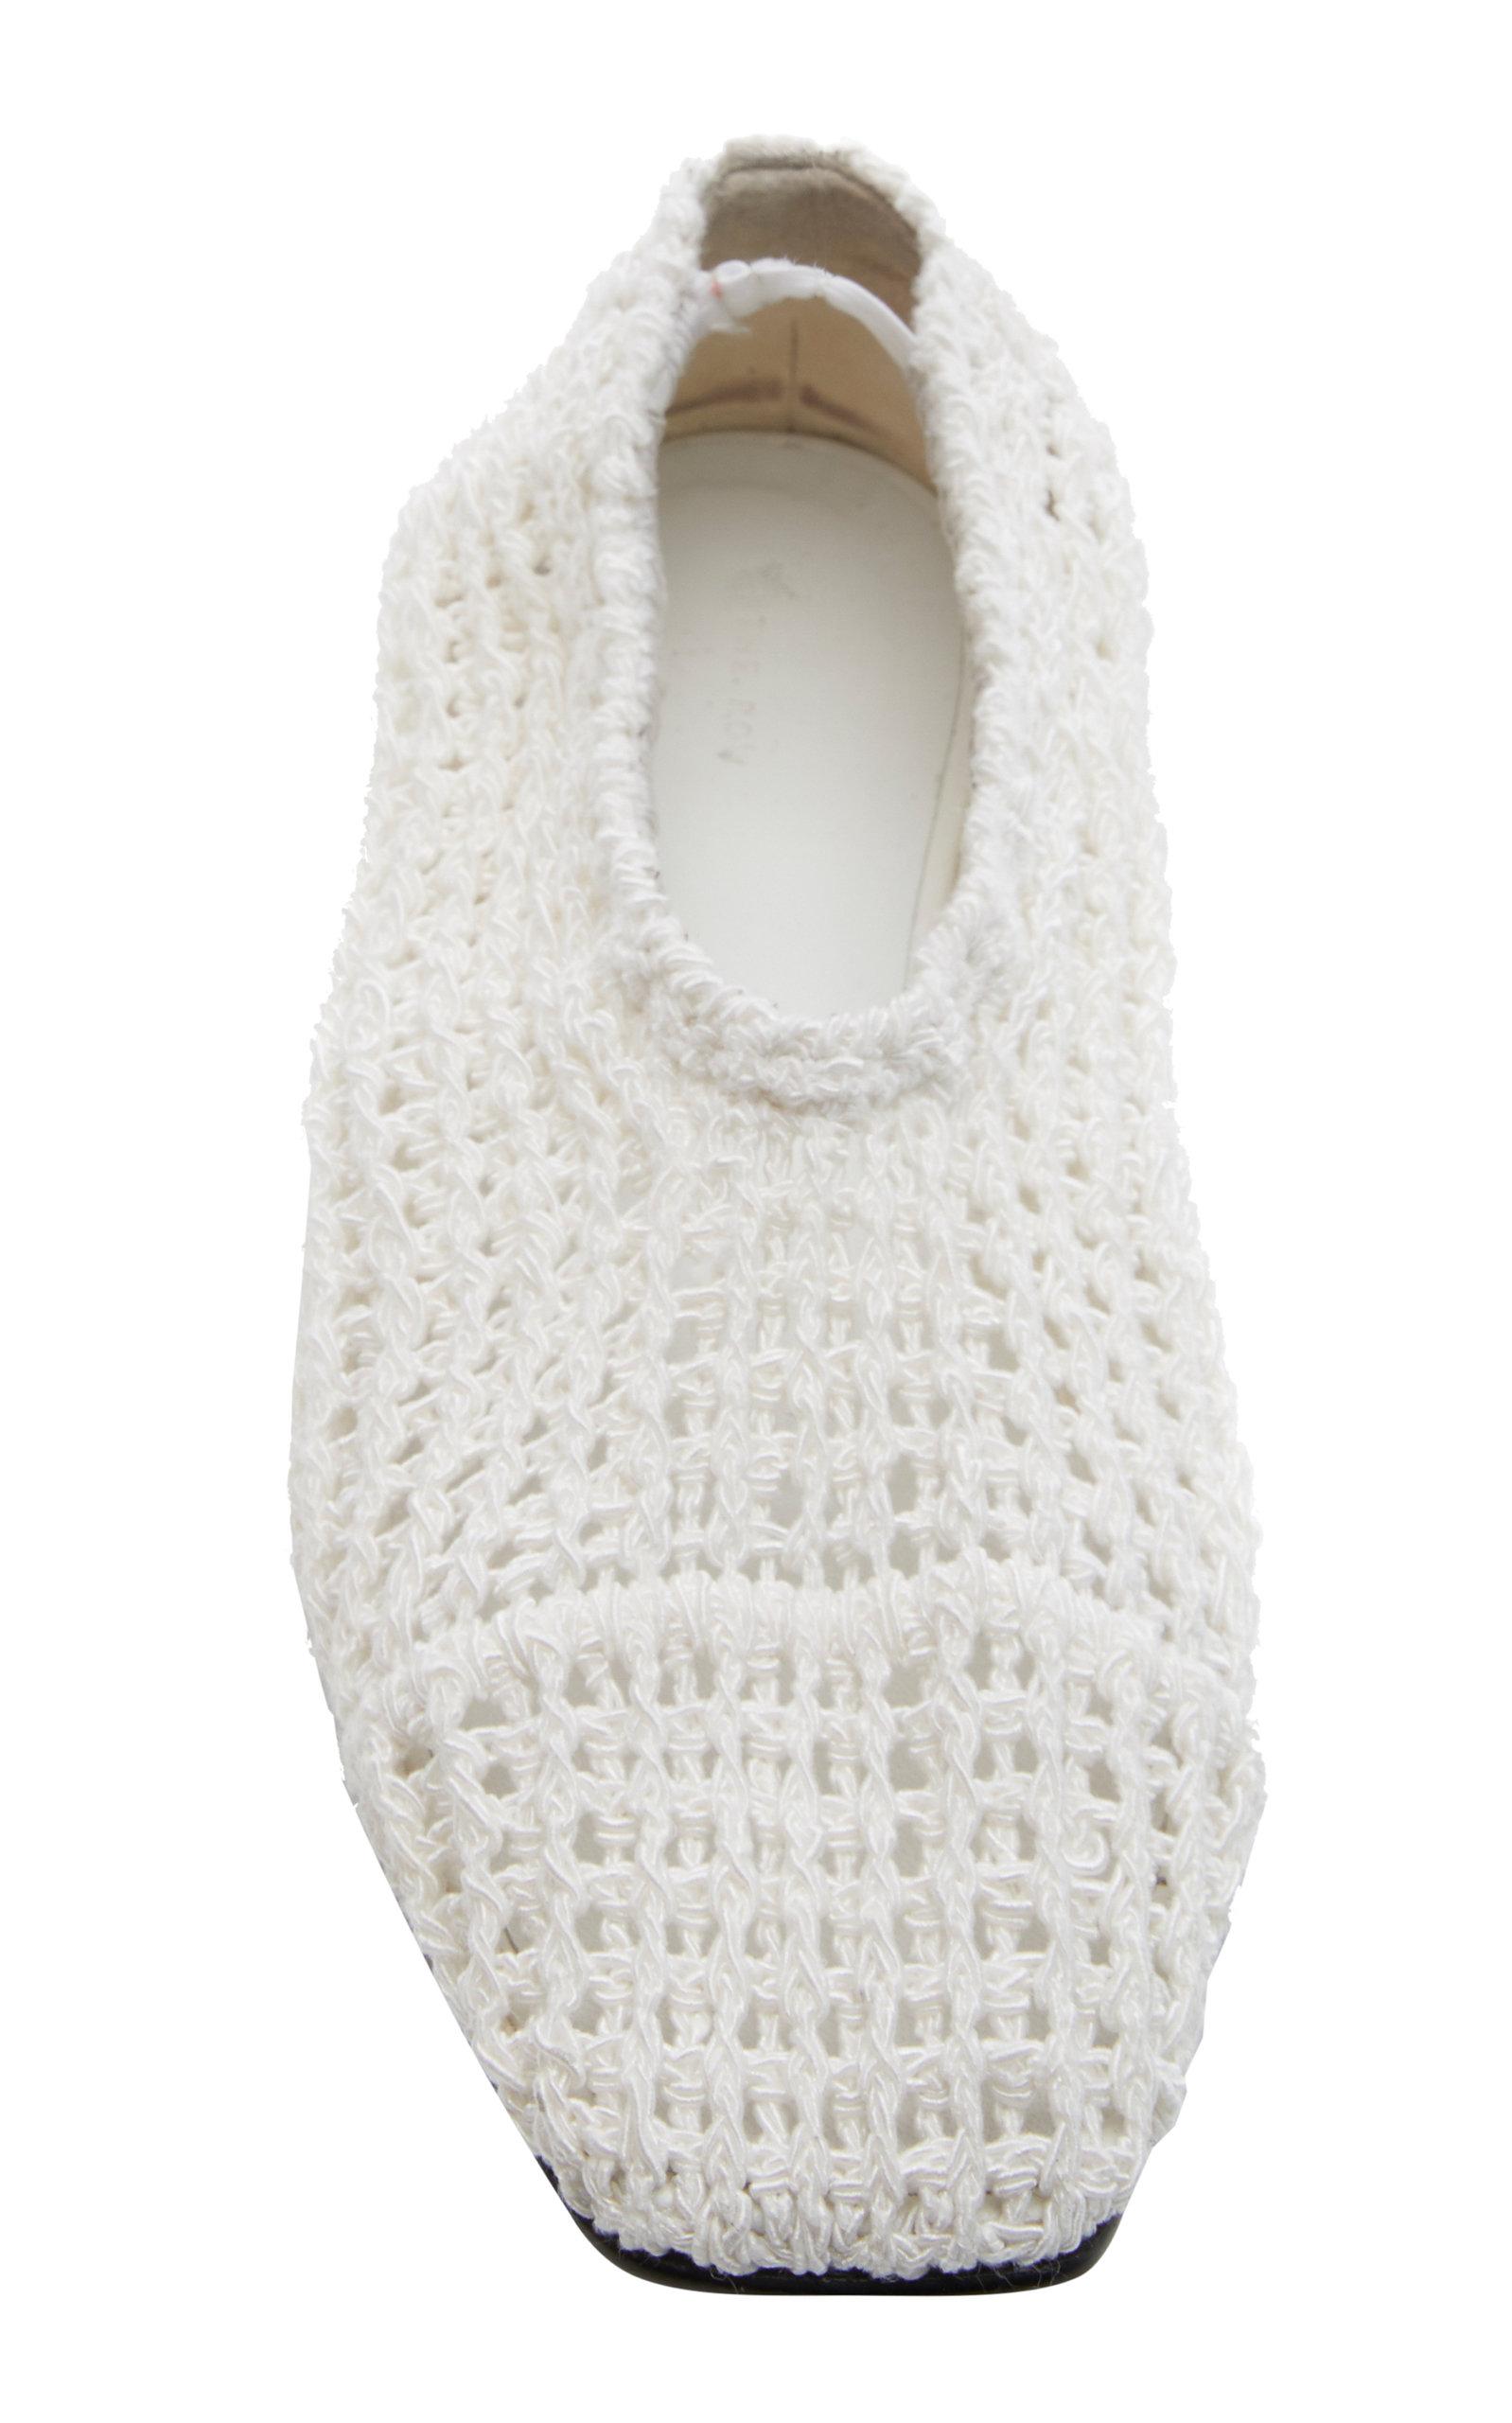 The Row Cotton Crochet Ballet Flats in White - Lyst